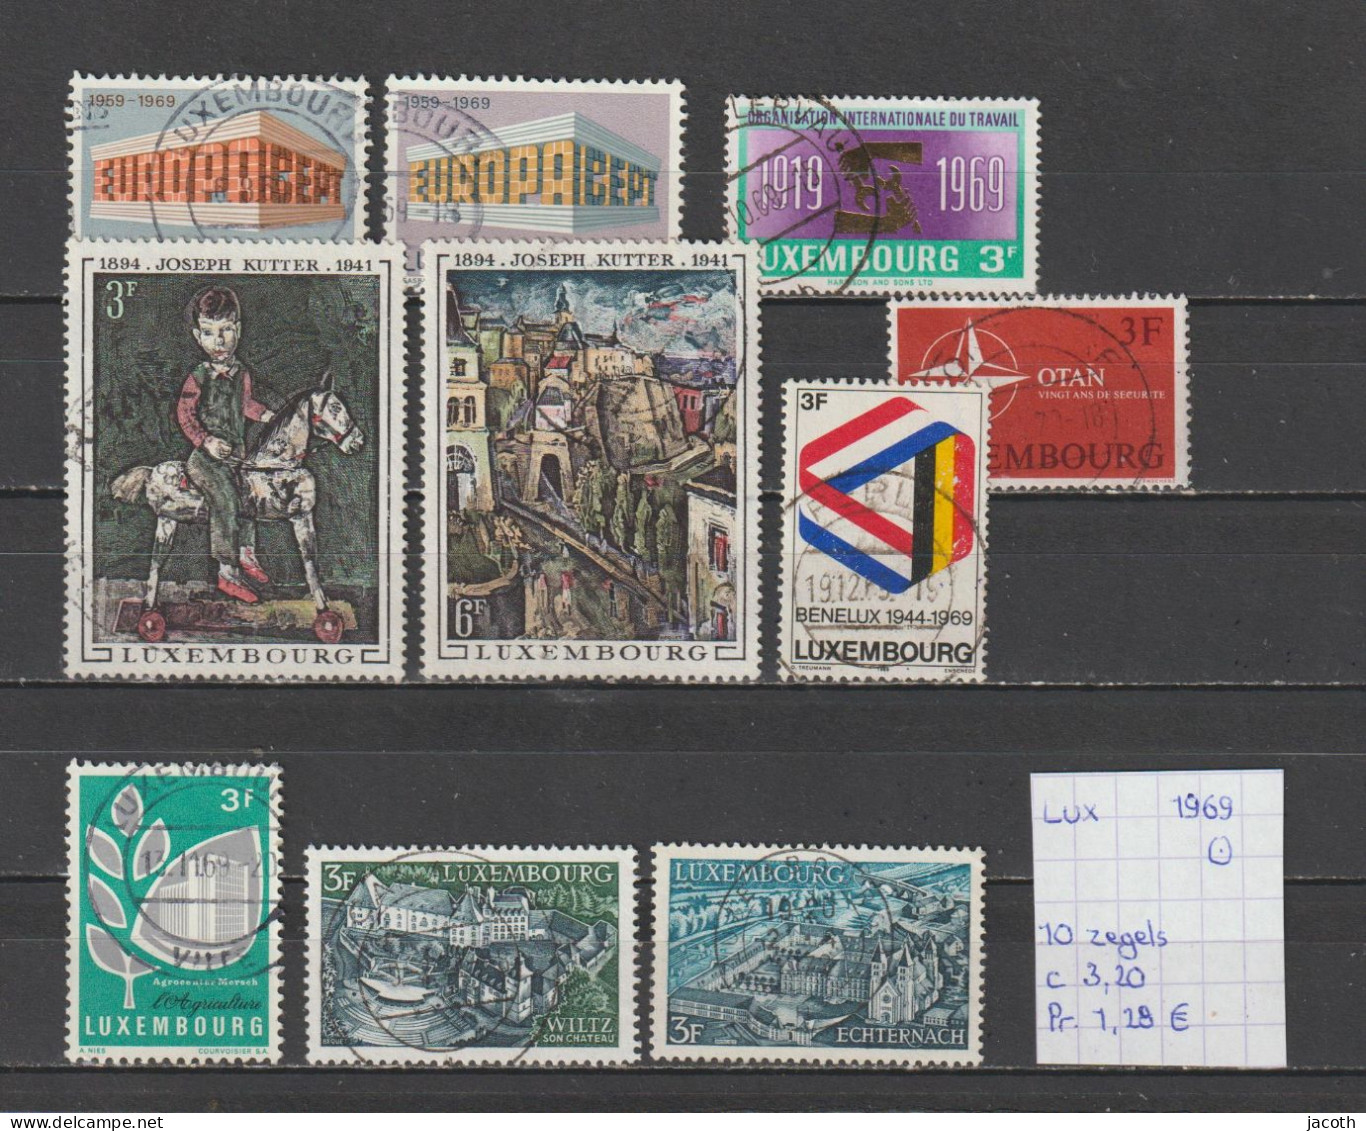 (TJ) Luxembourg 1969 - 10 Zegels (gest./obl./used) - Used Stamps